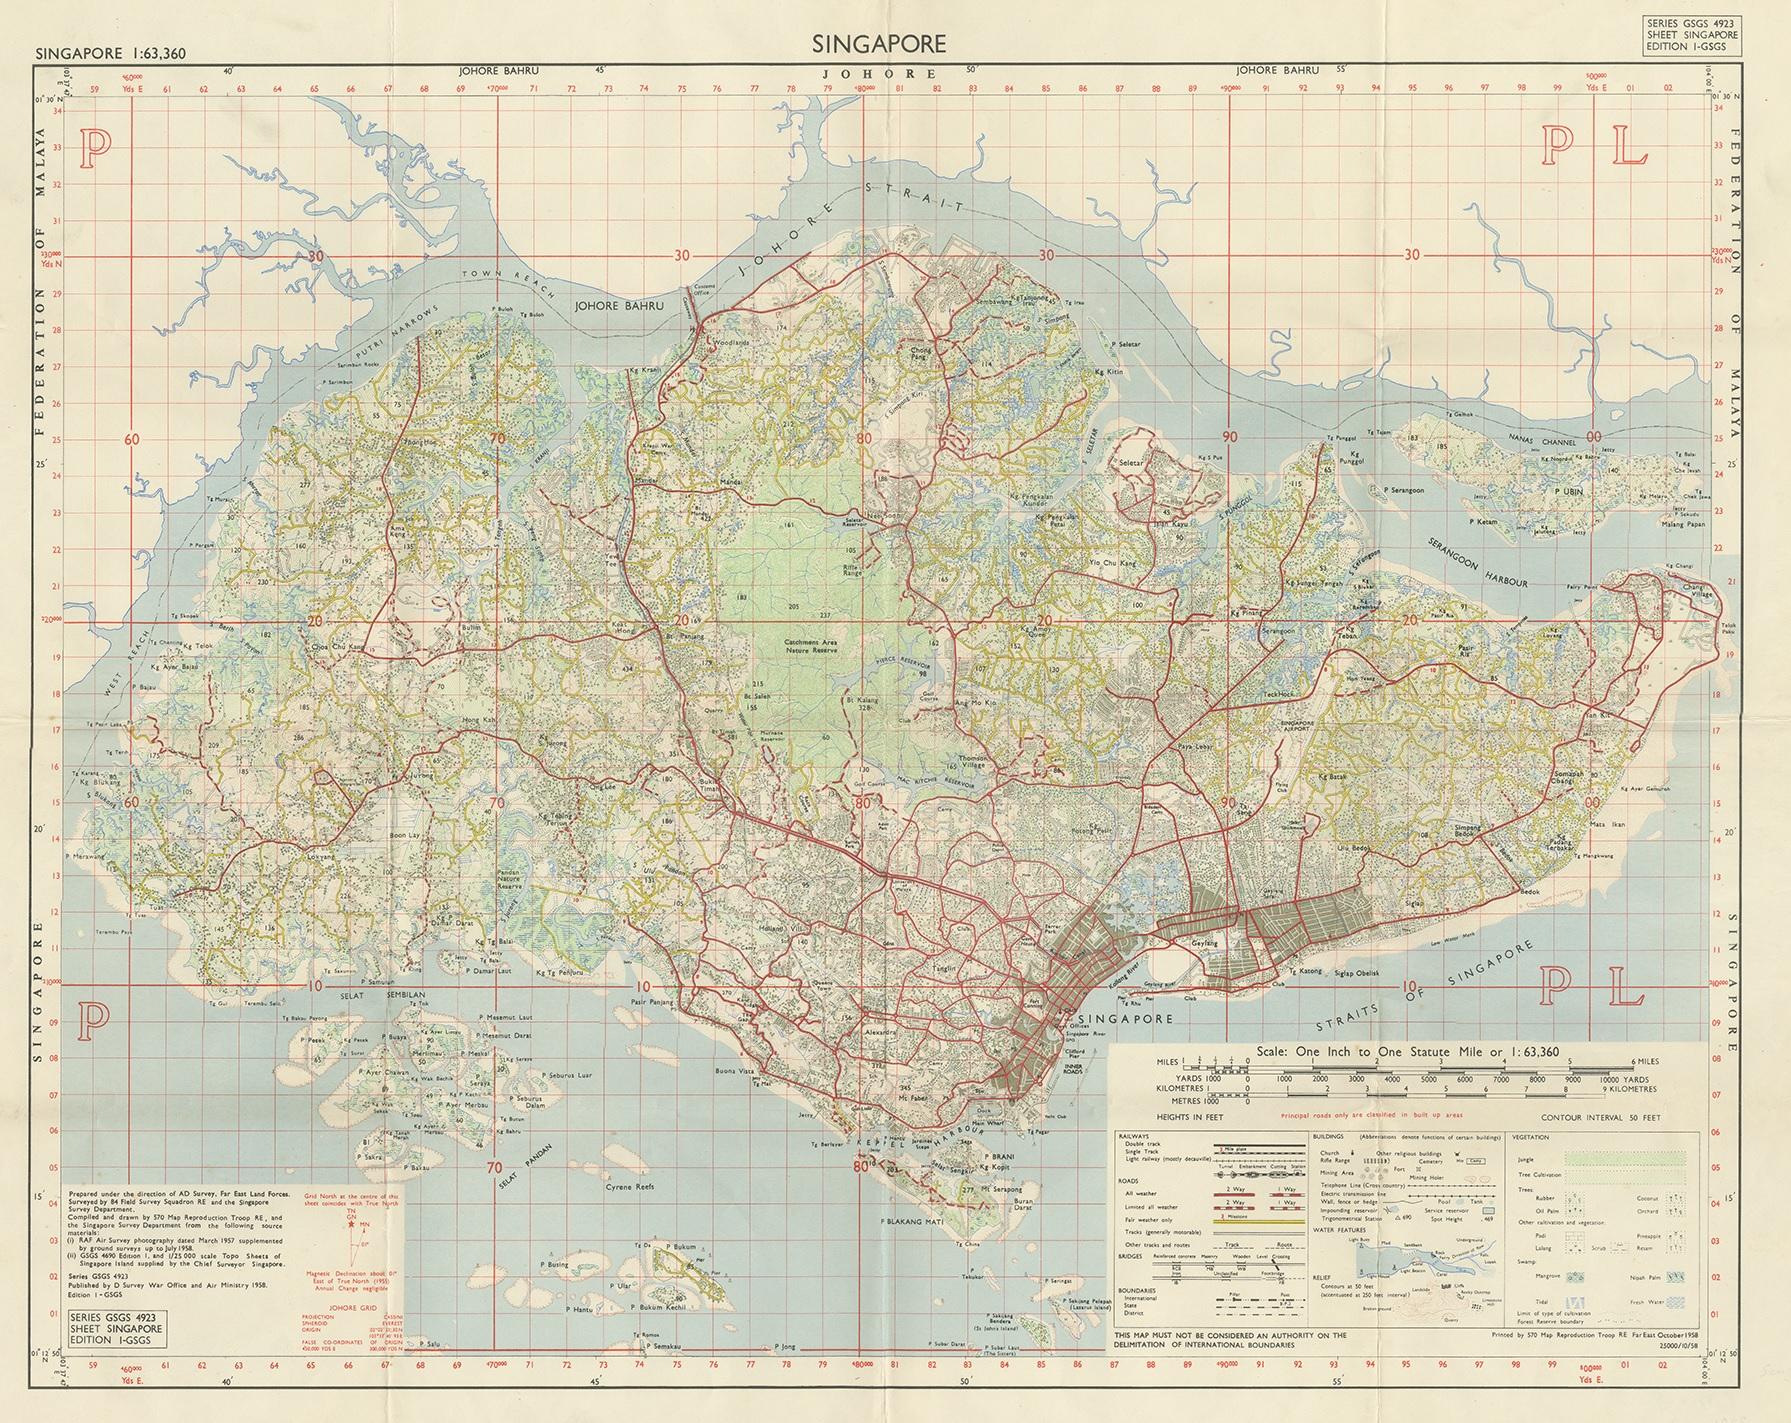 Vintage map titled 'Singapore'. This large folding map was published shortly after the U.K. Parliament passed the State of Singapore Act establishing the State of Singapore. Published by D Survey War Office and Air Ministry 1958. Edition I - GSGS.